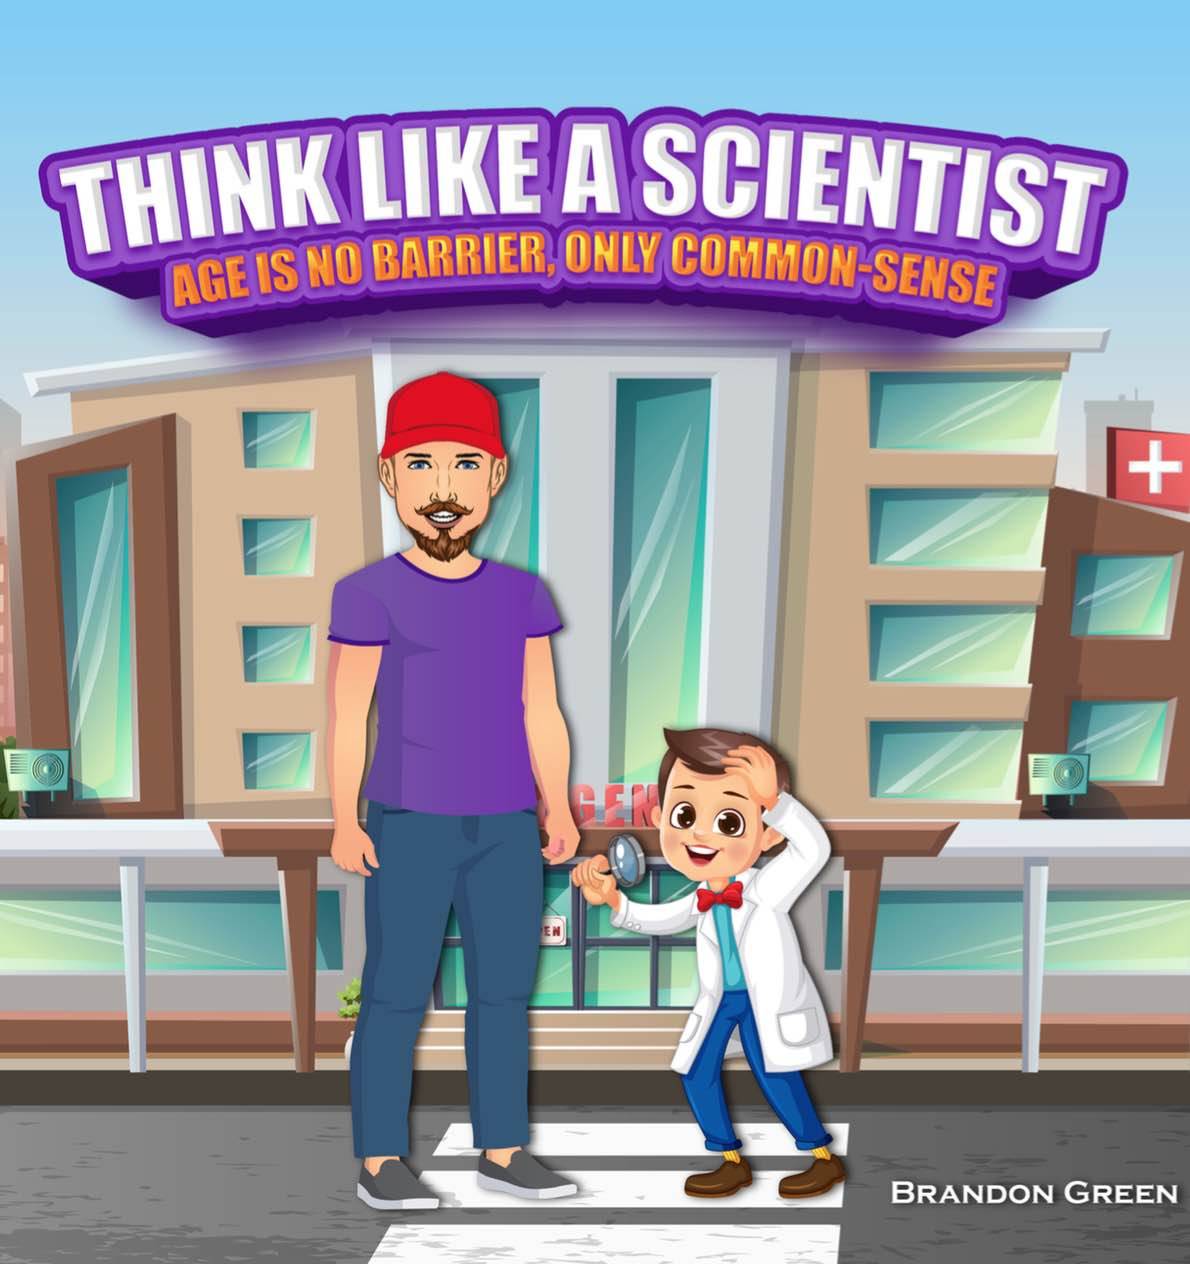 free science books download websites